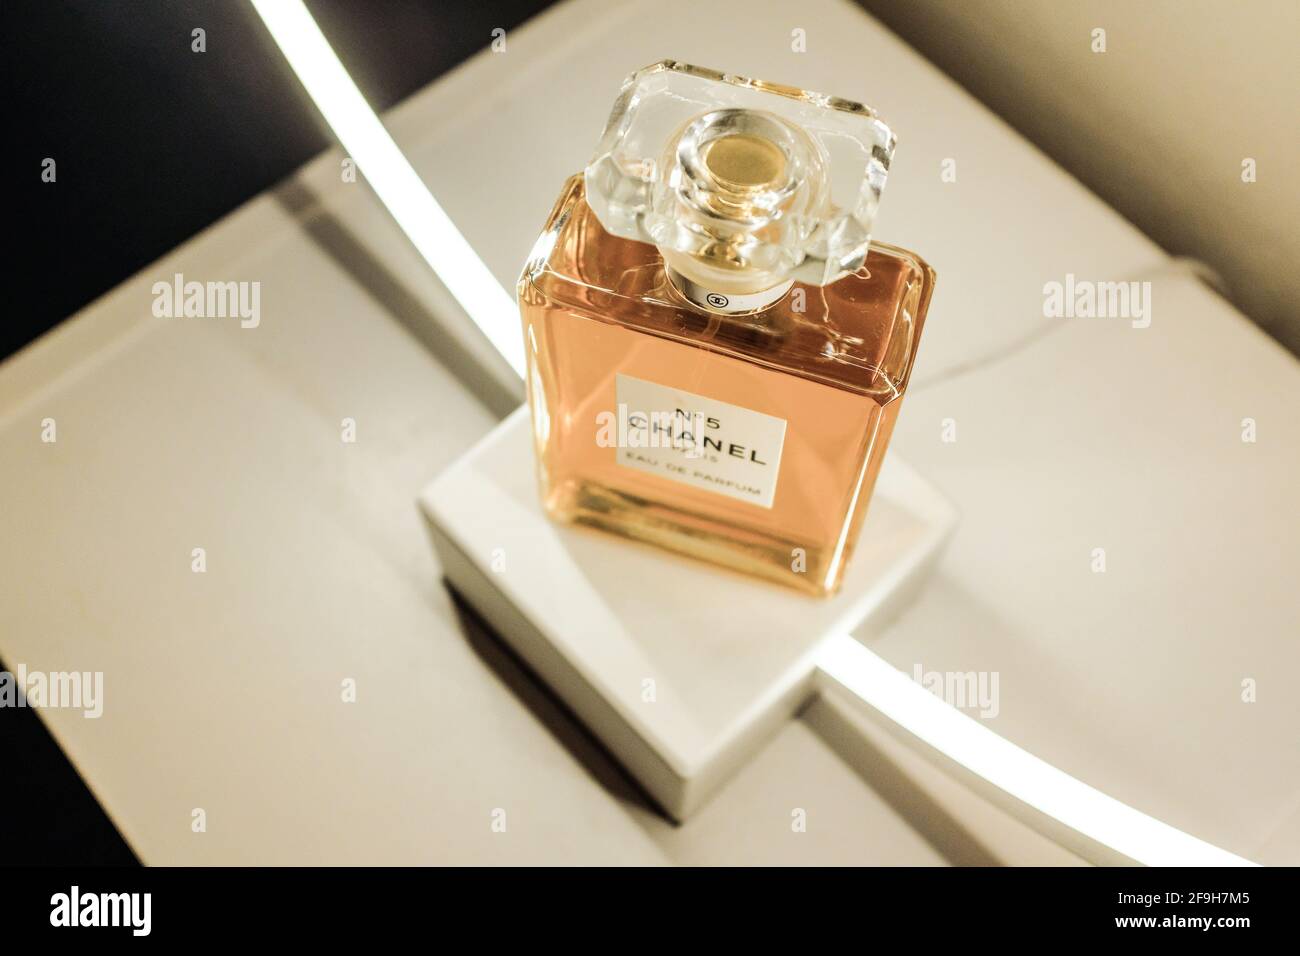 AUSTIN, UNITED STATES - Dec 09, 2020: Beautiful looking Chanel No 5 perfume bottle taken with circular ring light Stock Photo